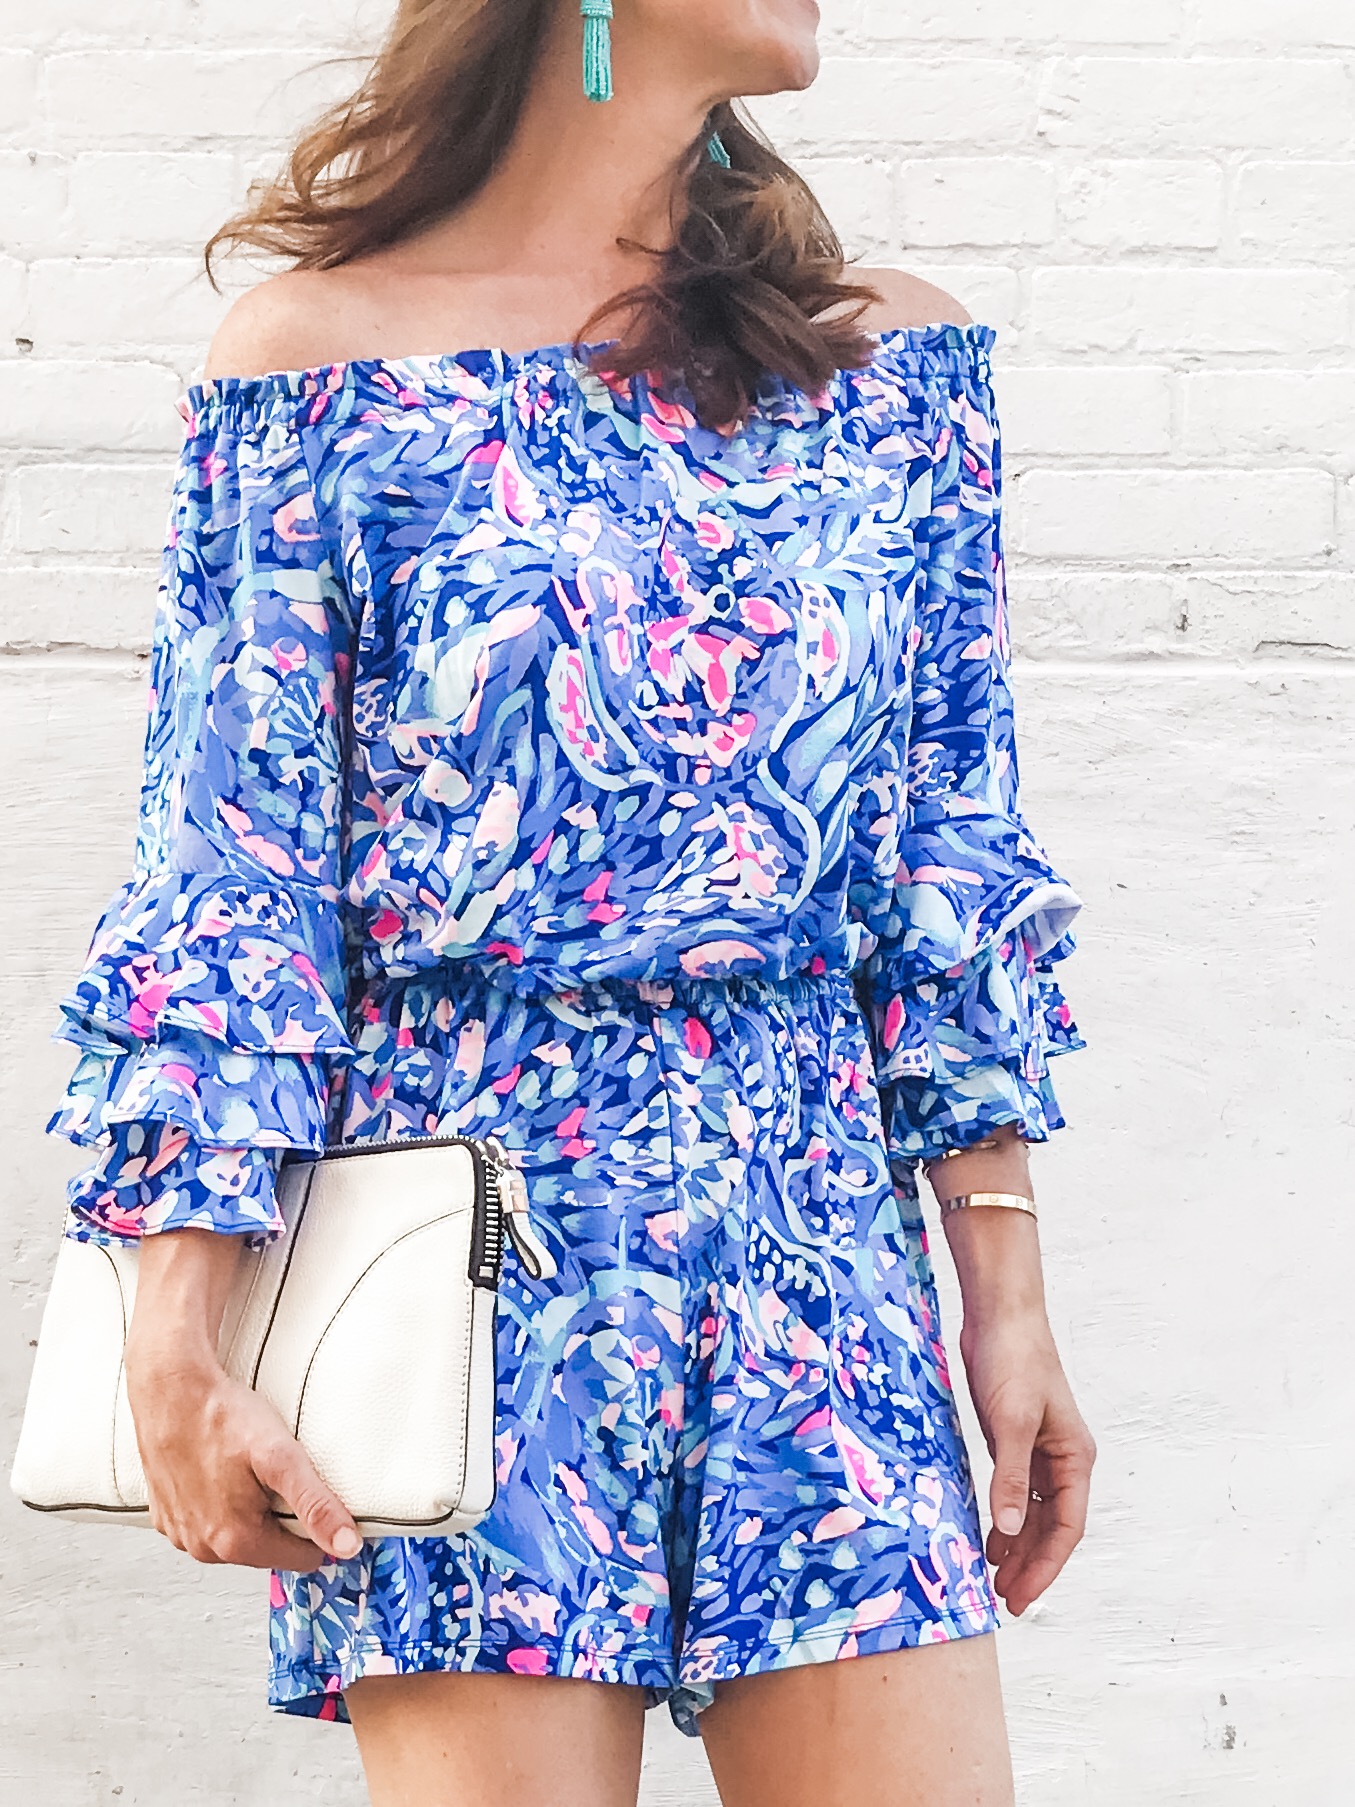 summer rompers lilly pulitzer outfits. lilly pulitzer romper.